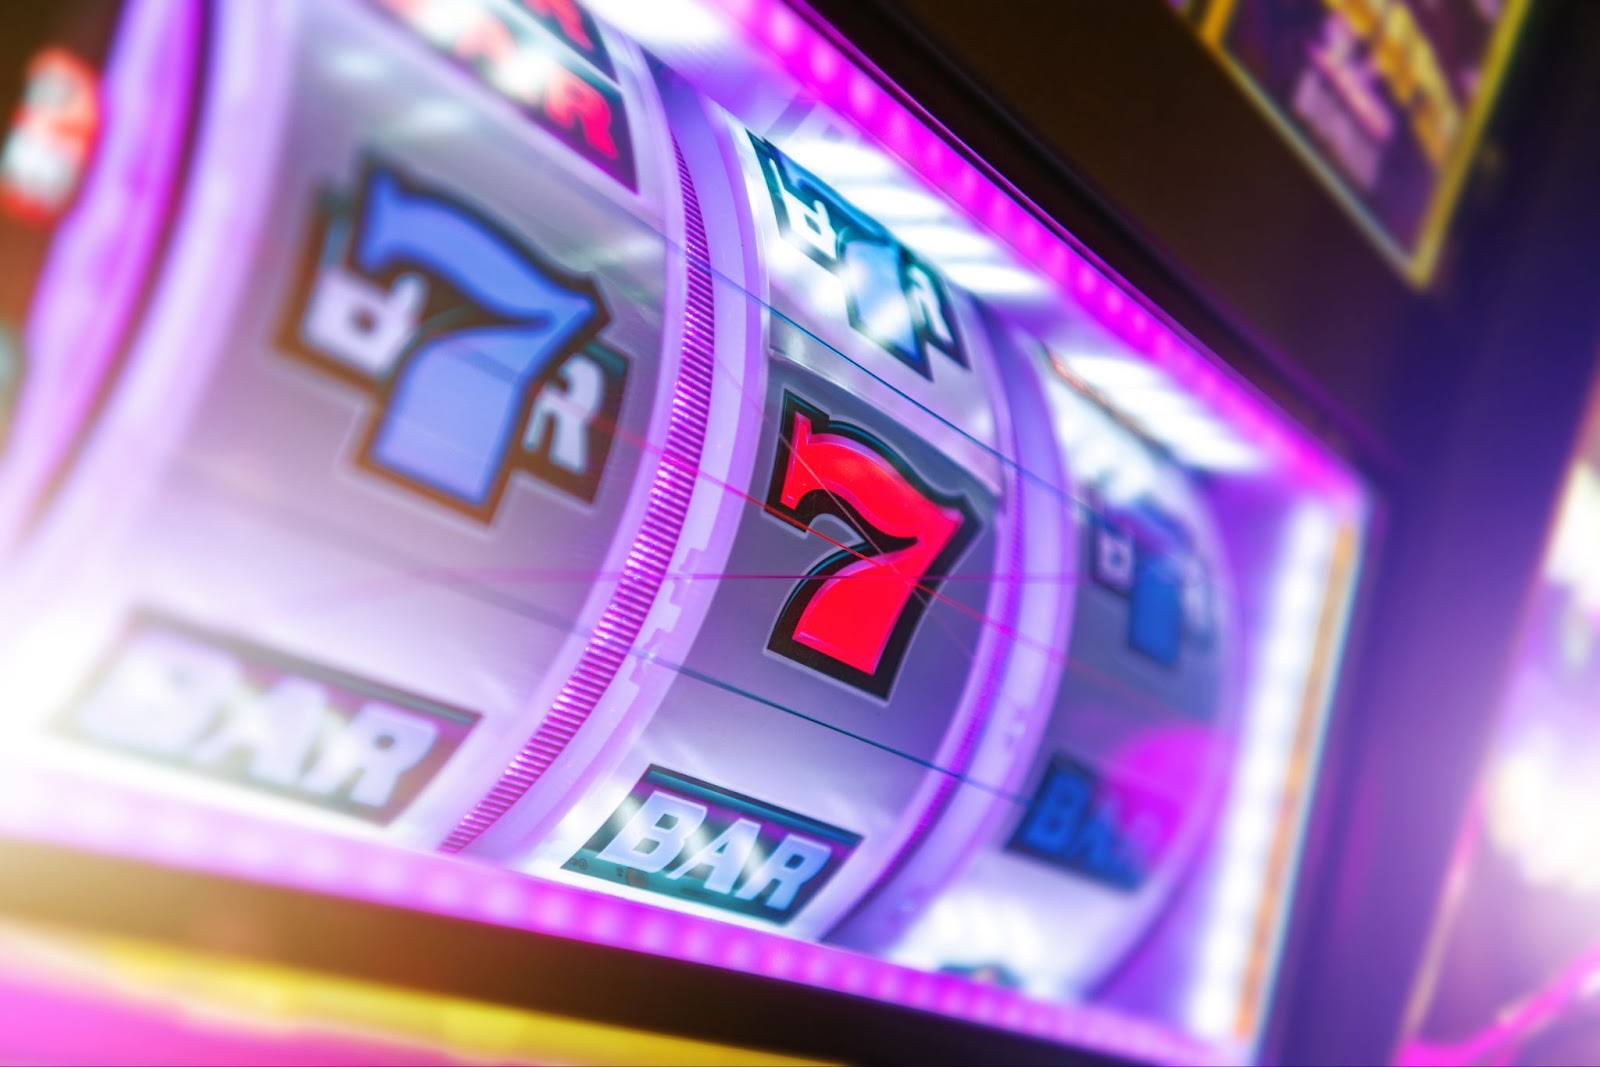 A vibrant close-up of a classic slot machine reel displaying the lucky number seven and bar symbols.